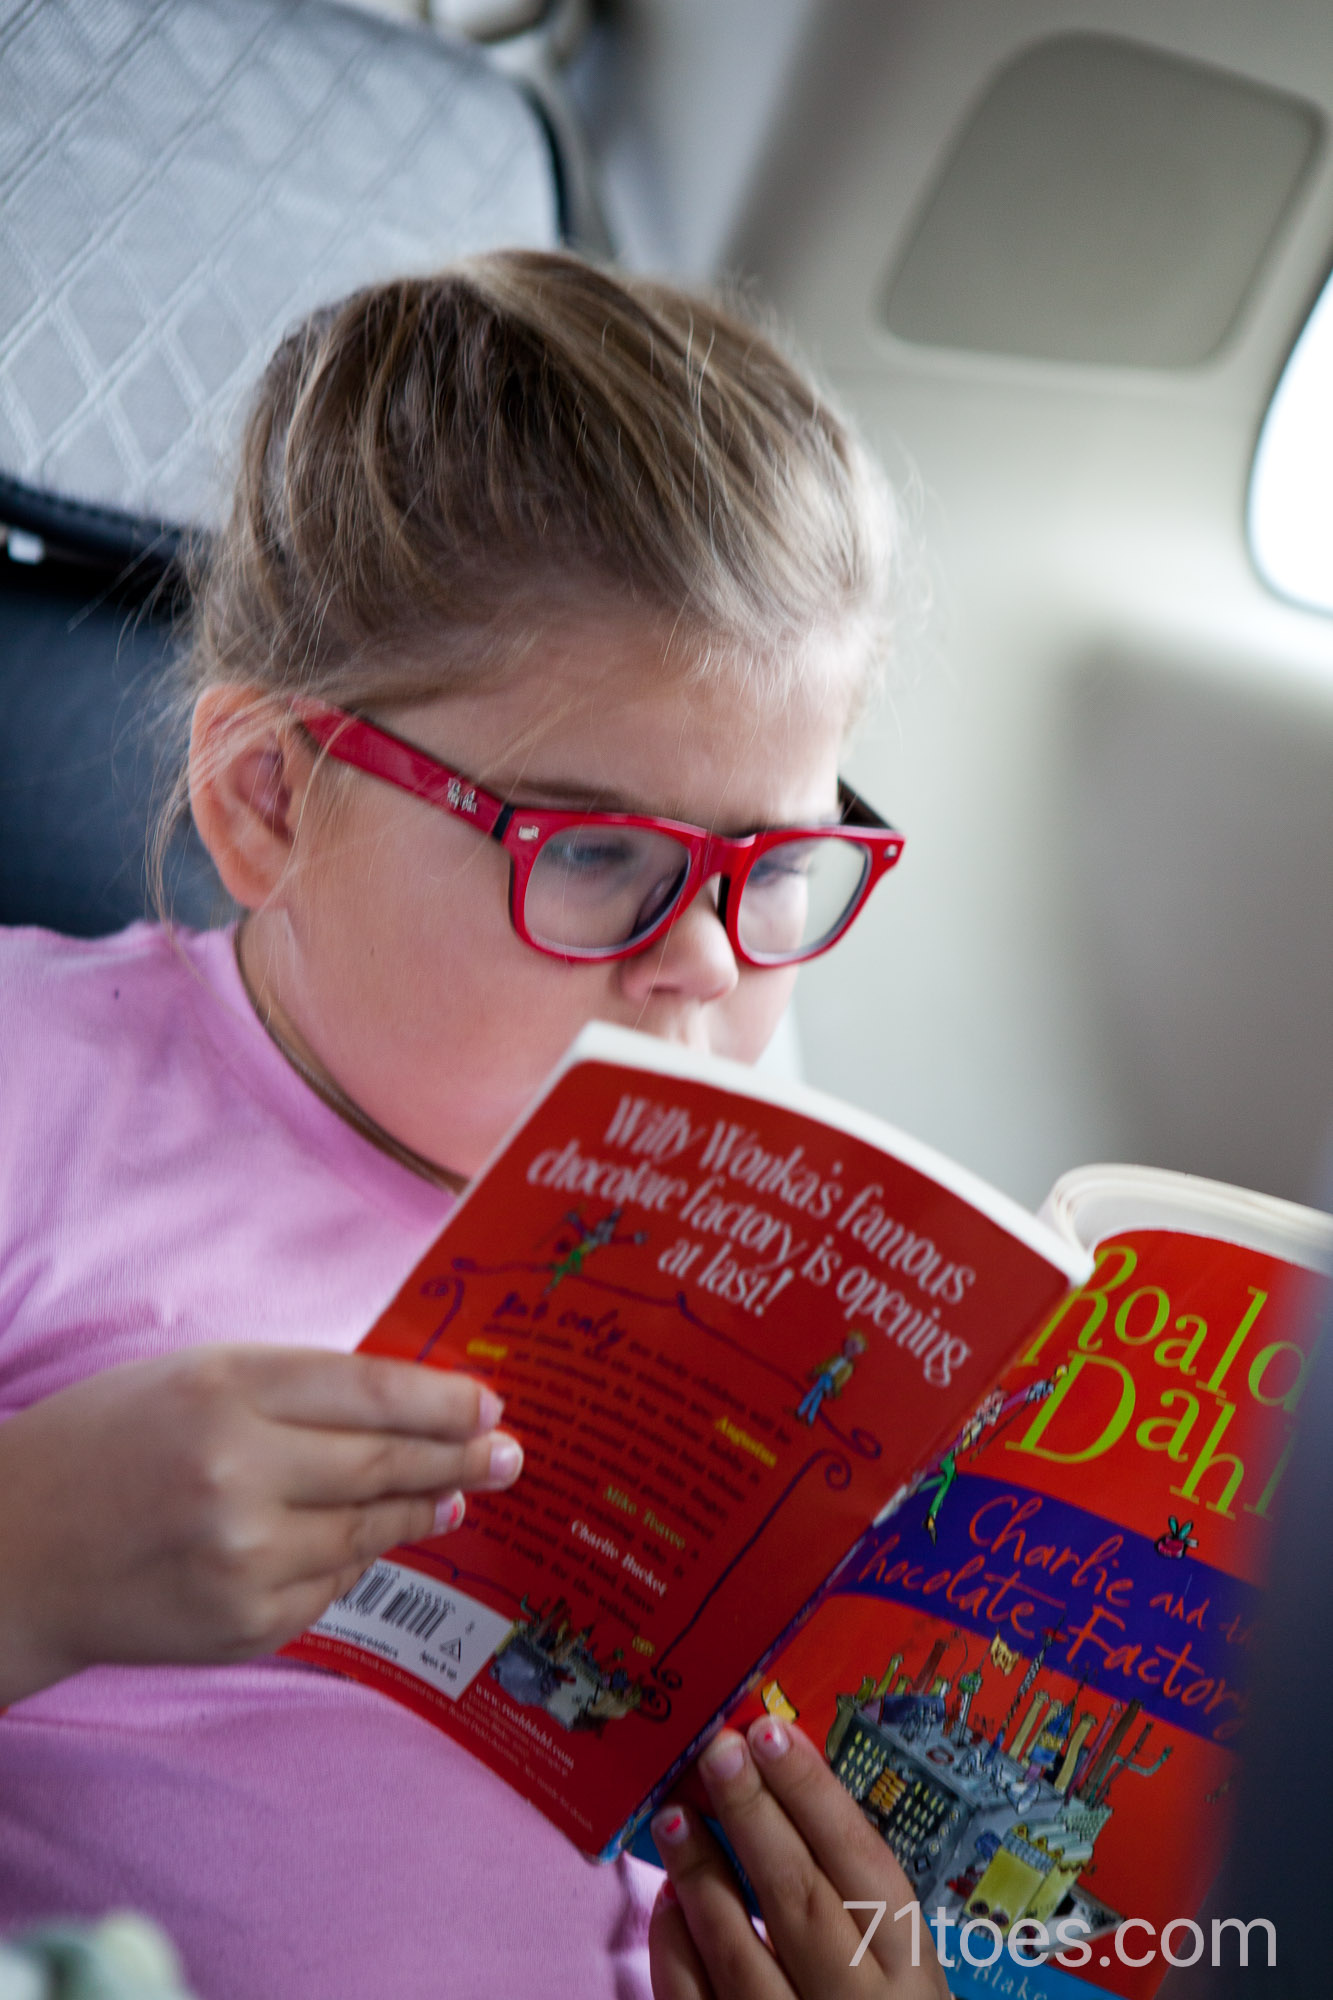 Lucy reading "Charlie and the Chocolate Factory"